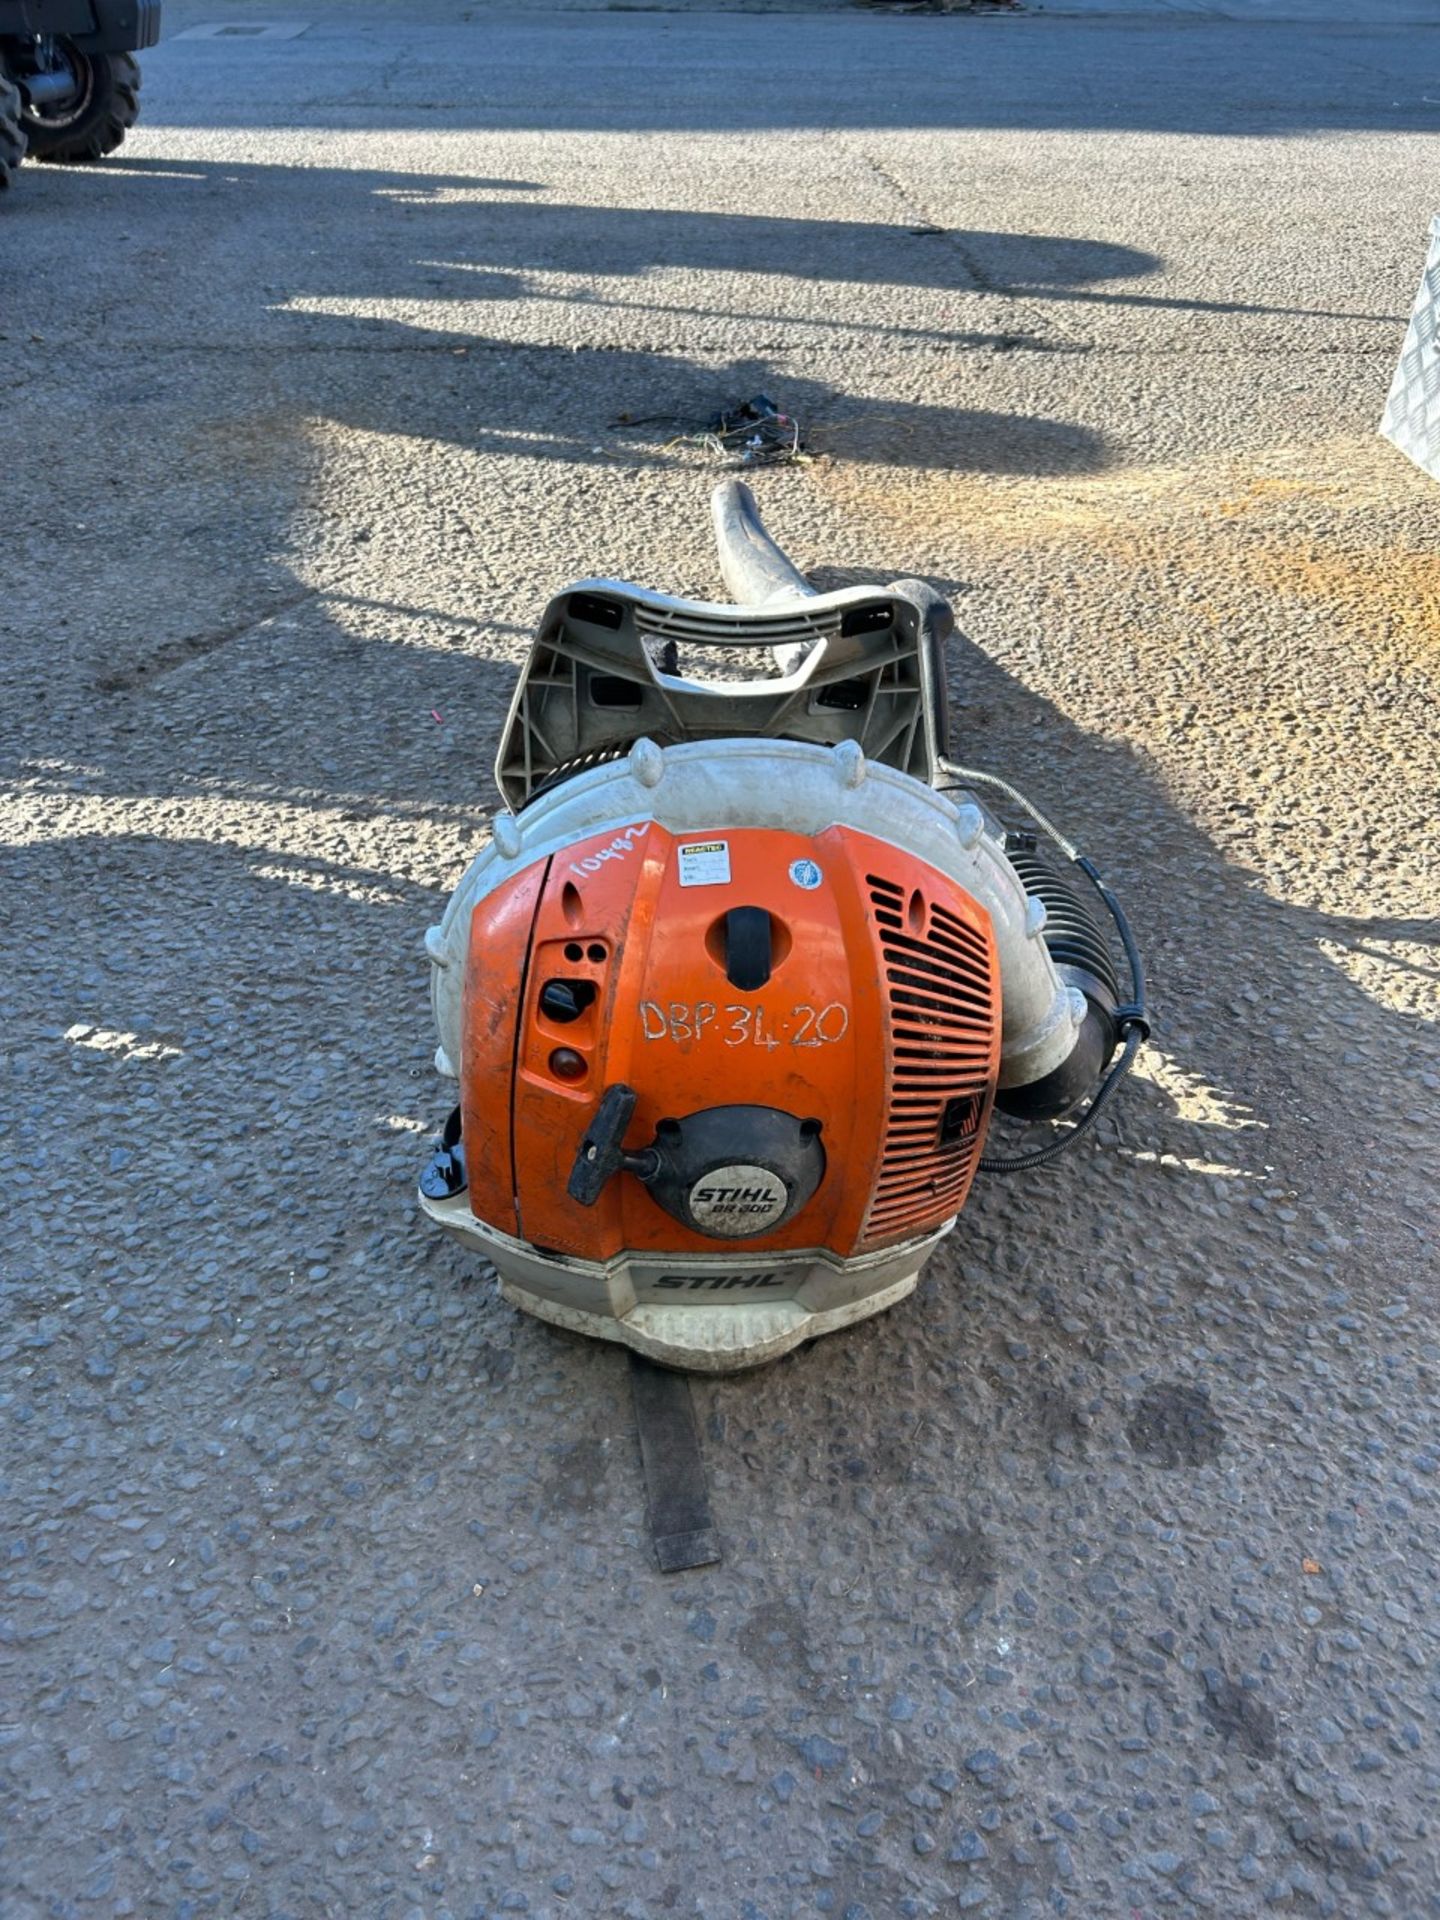 Stihl BR600 backpack blower. 2019 model good condition, full working order as seen in video